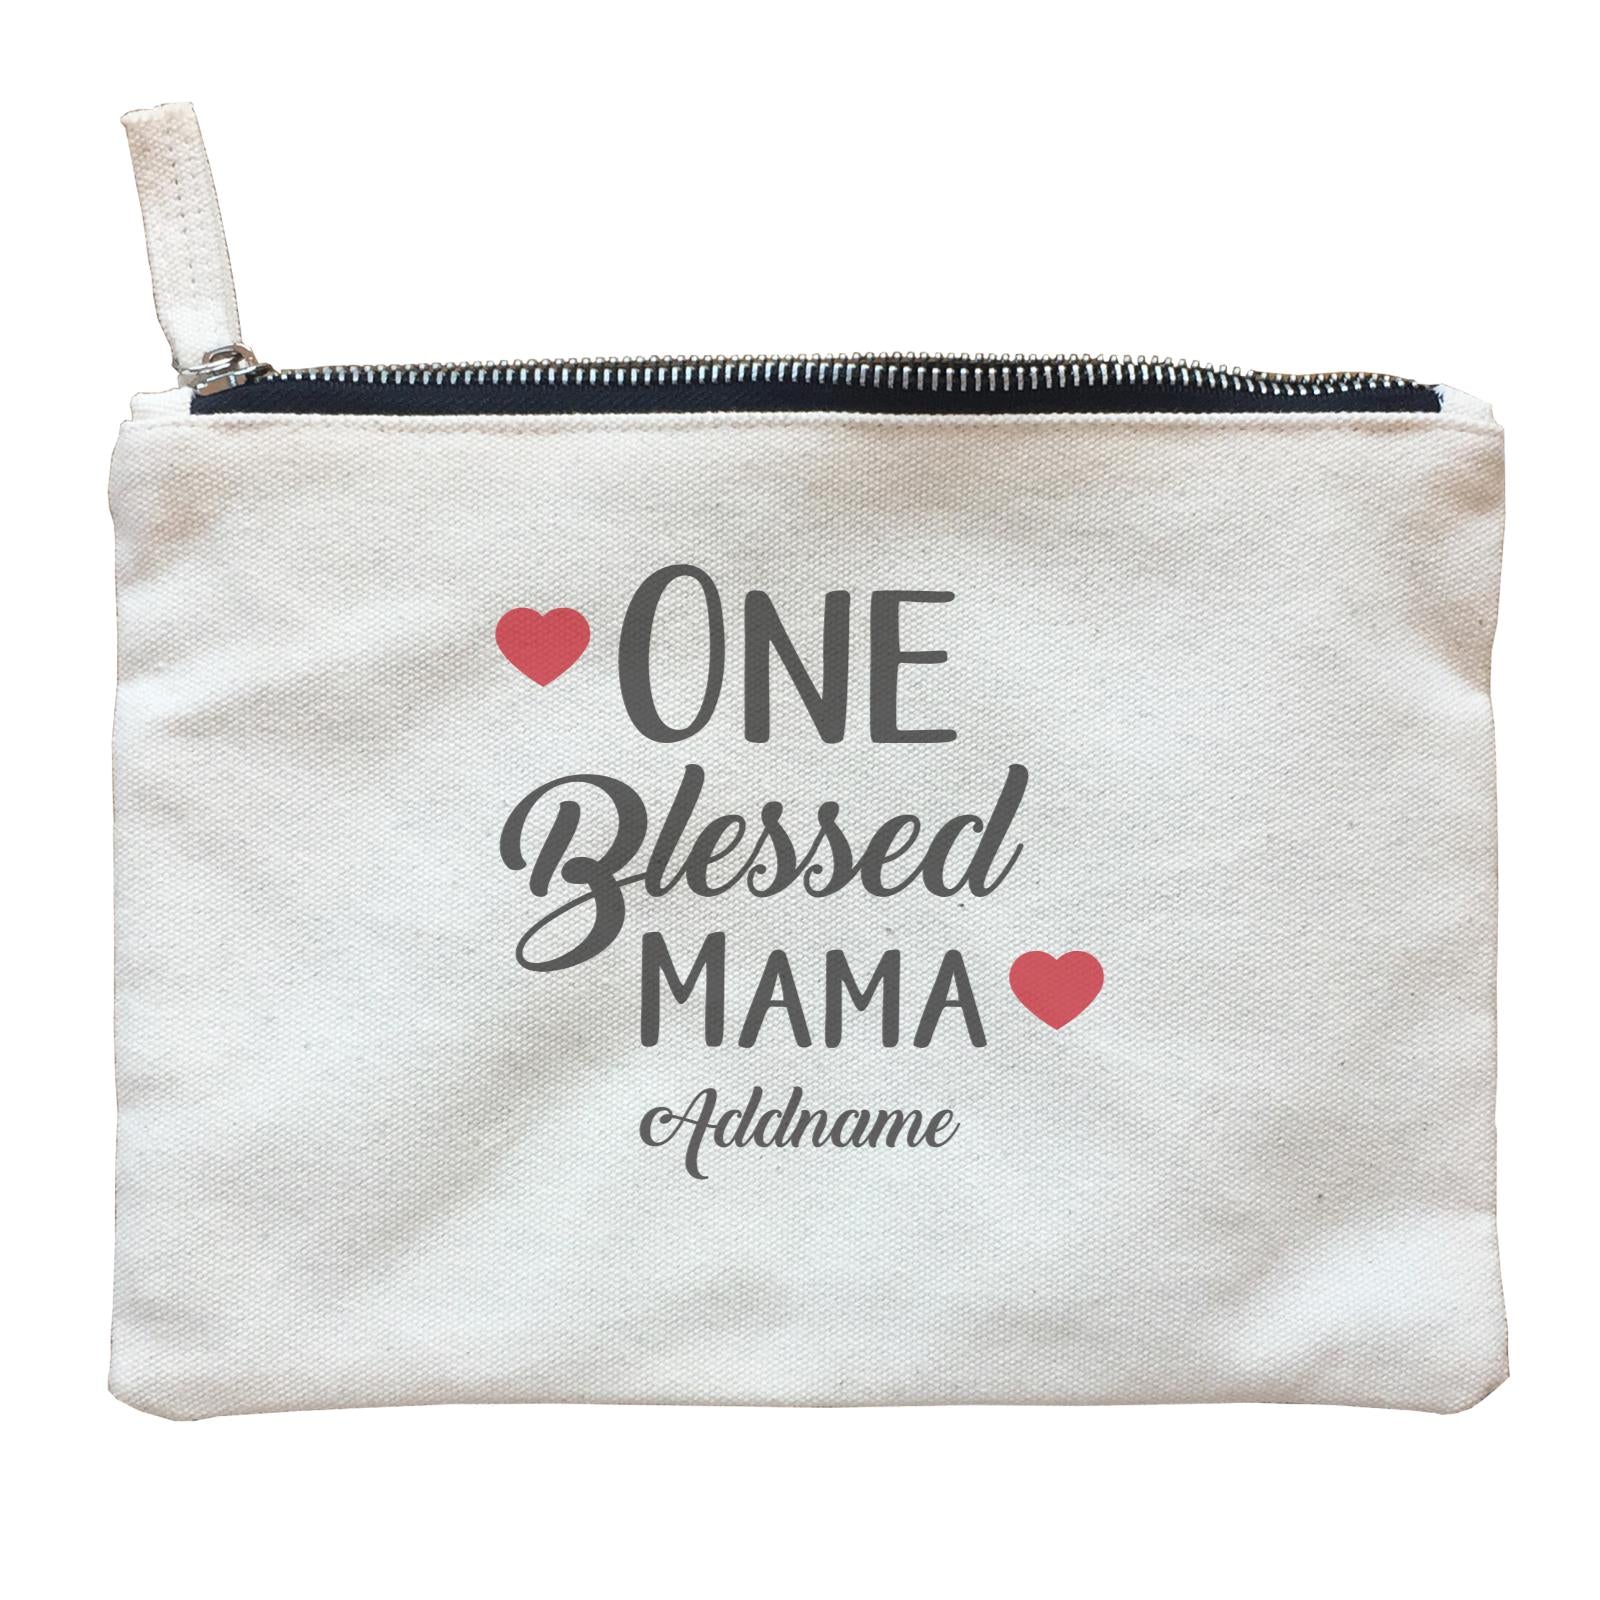 Christian Series One Blessed Mama Addname Zipper Pouch